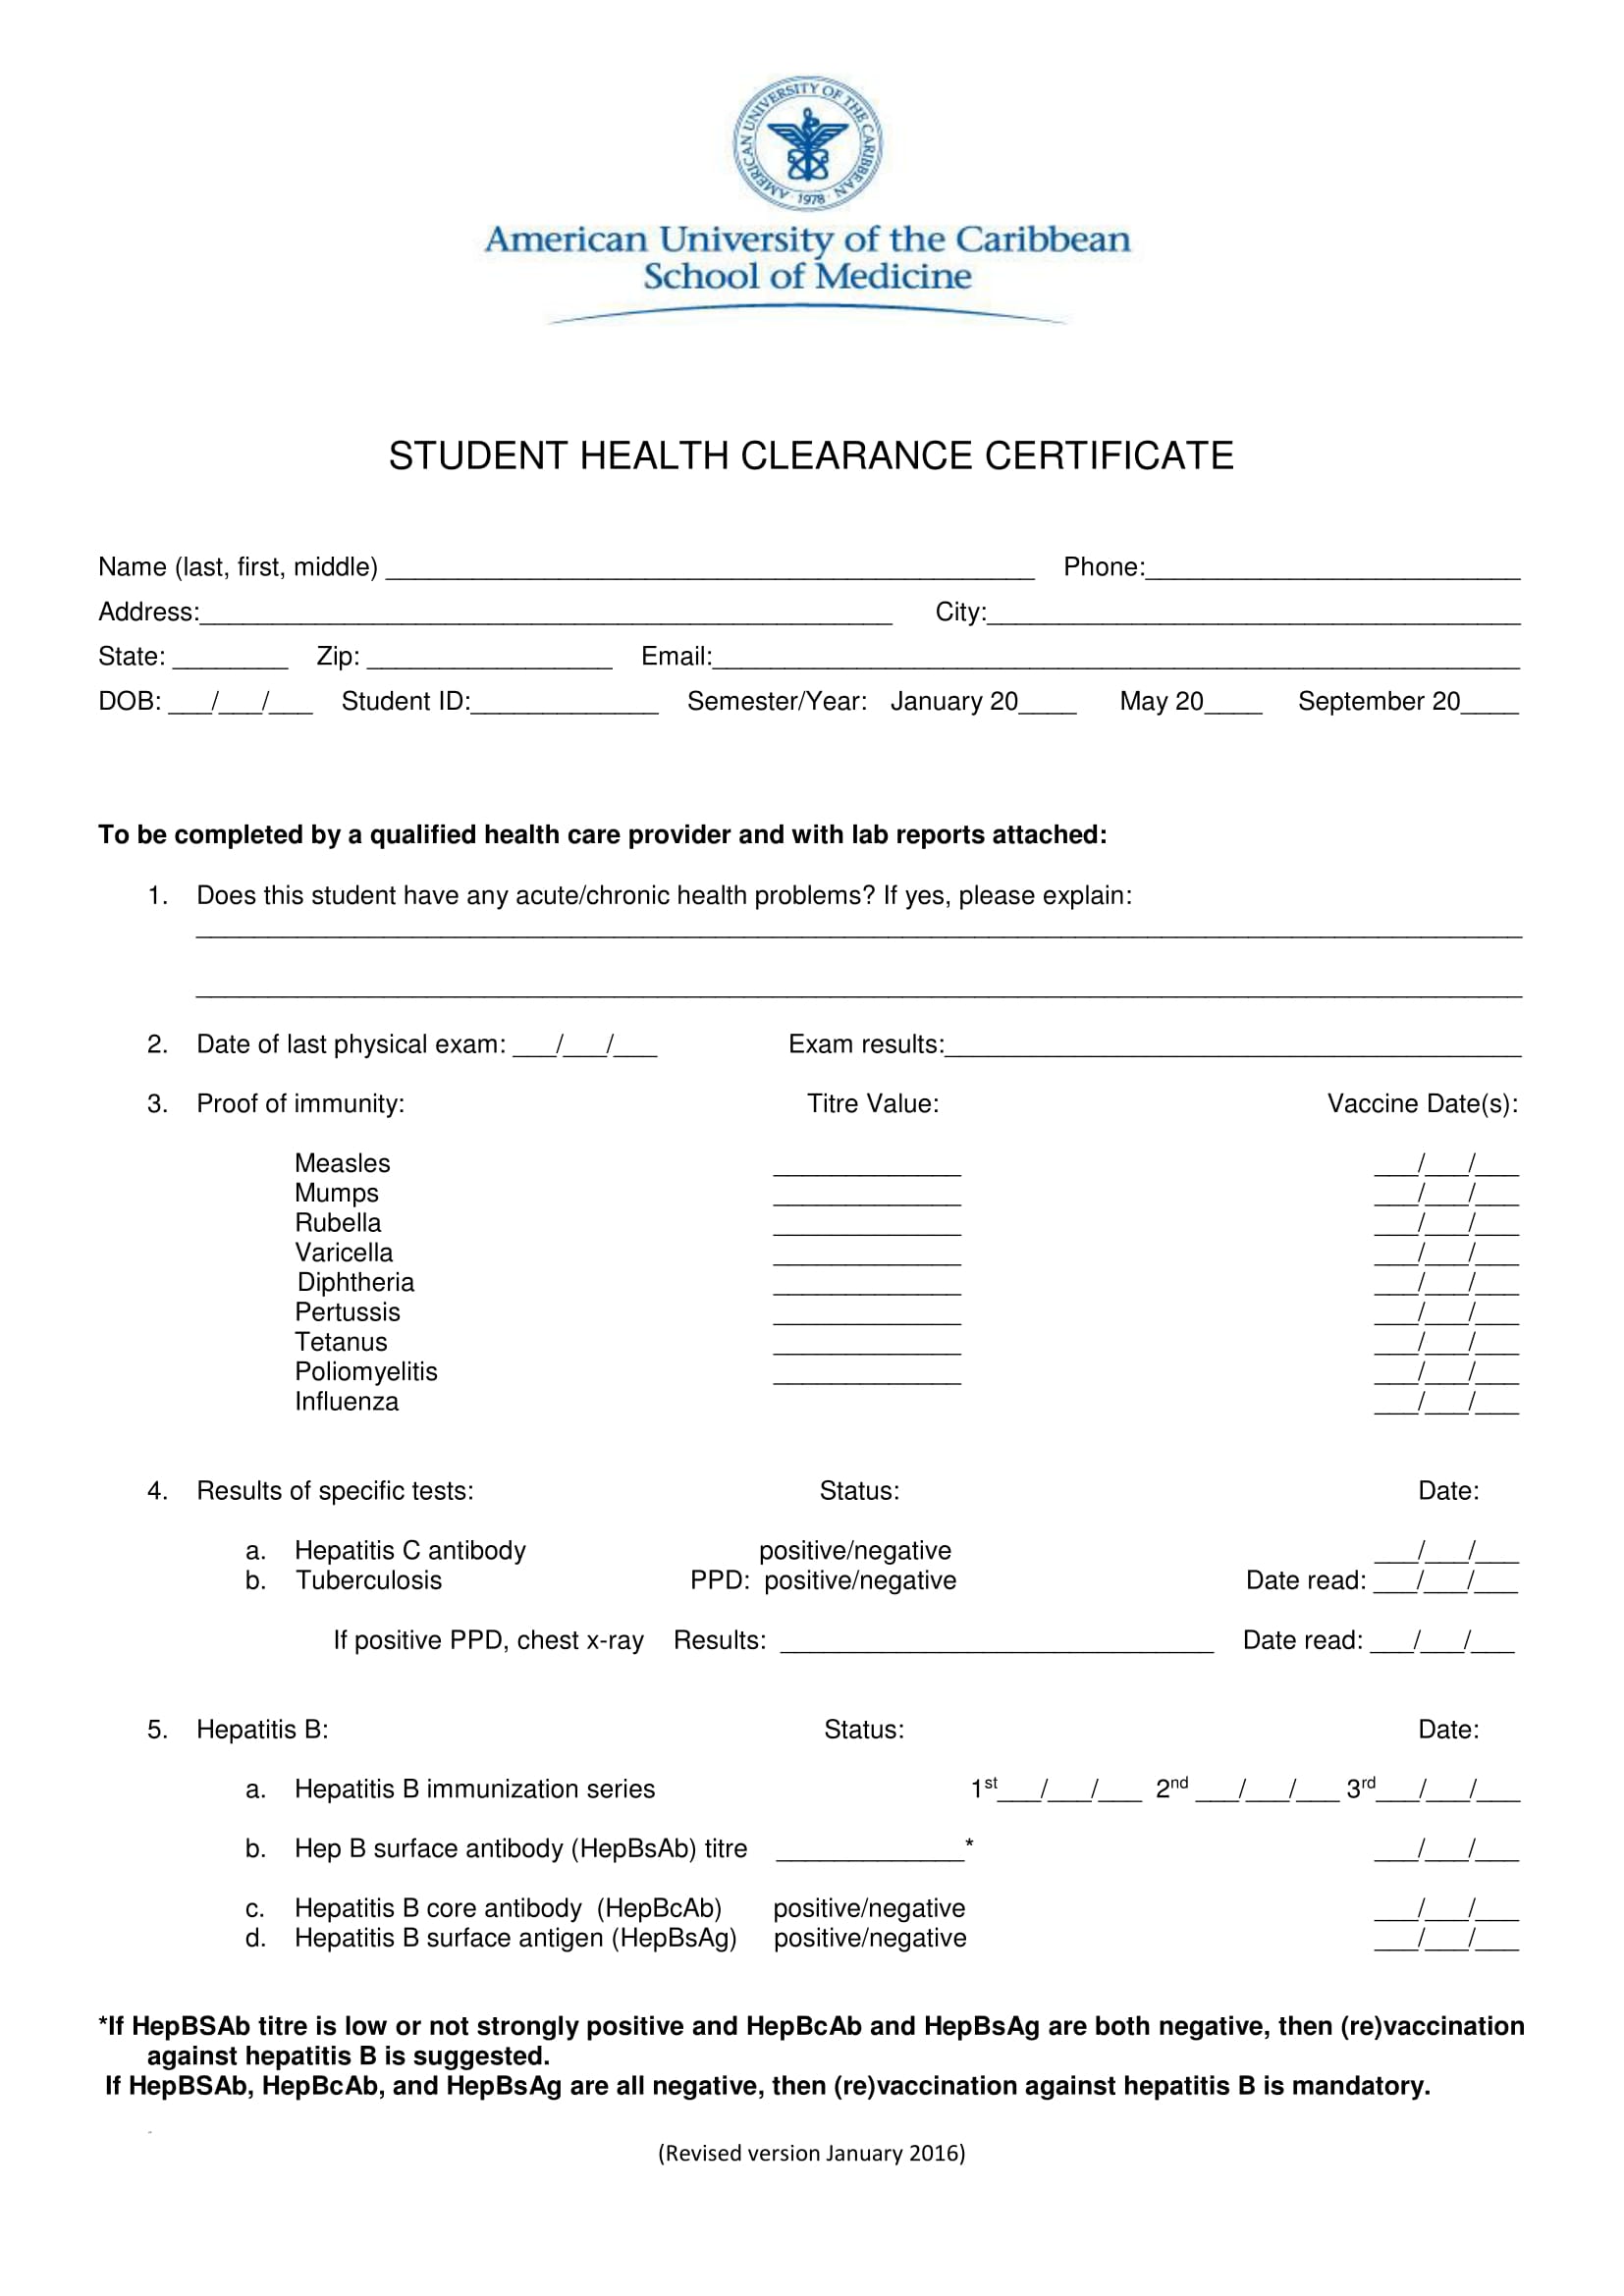 student health clearance certificate form 1